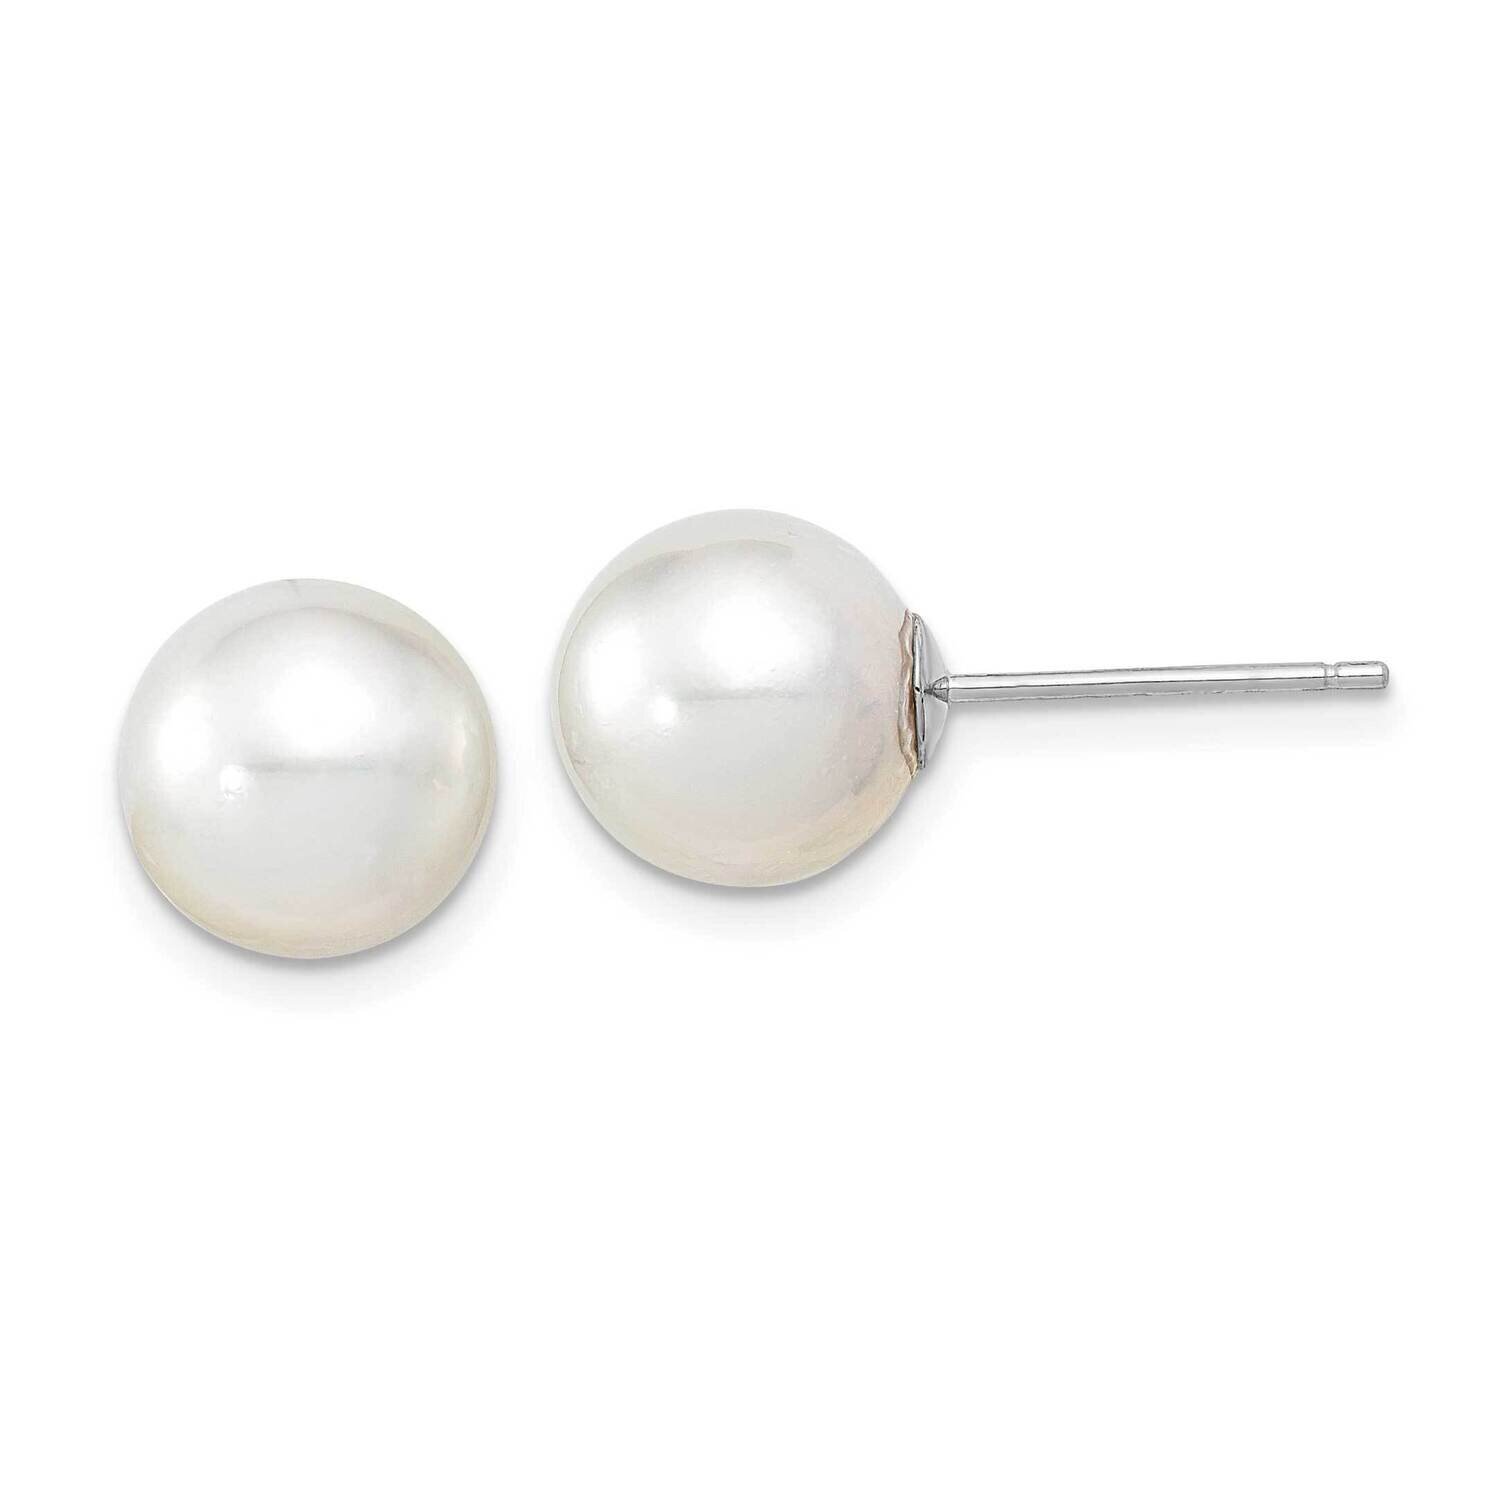 9-10mm Round White Saltwater South Sea Pearl Earrings 14k White Gold XF332WE